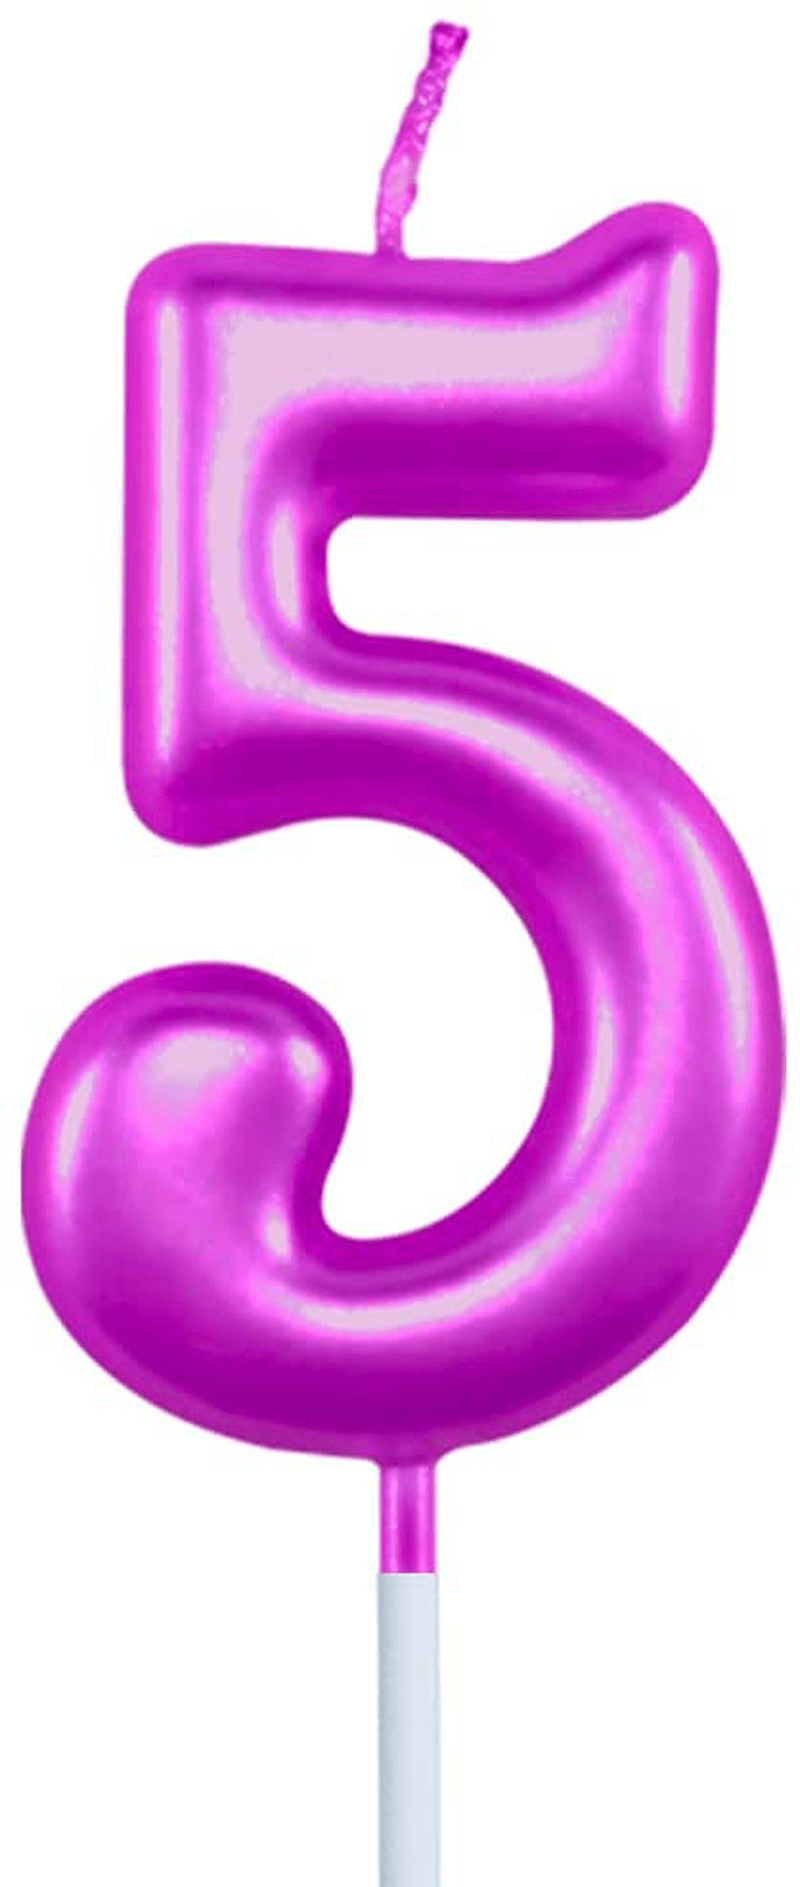 XNOVA 3rd Birthday Candle Three Years Purple Happy Birthday Number 3 Candles for Cake Topper Decoration for Party Kids Adults Numeral 30 23 37 33 13